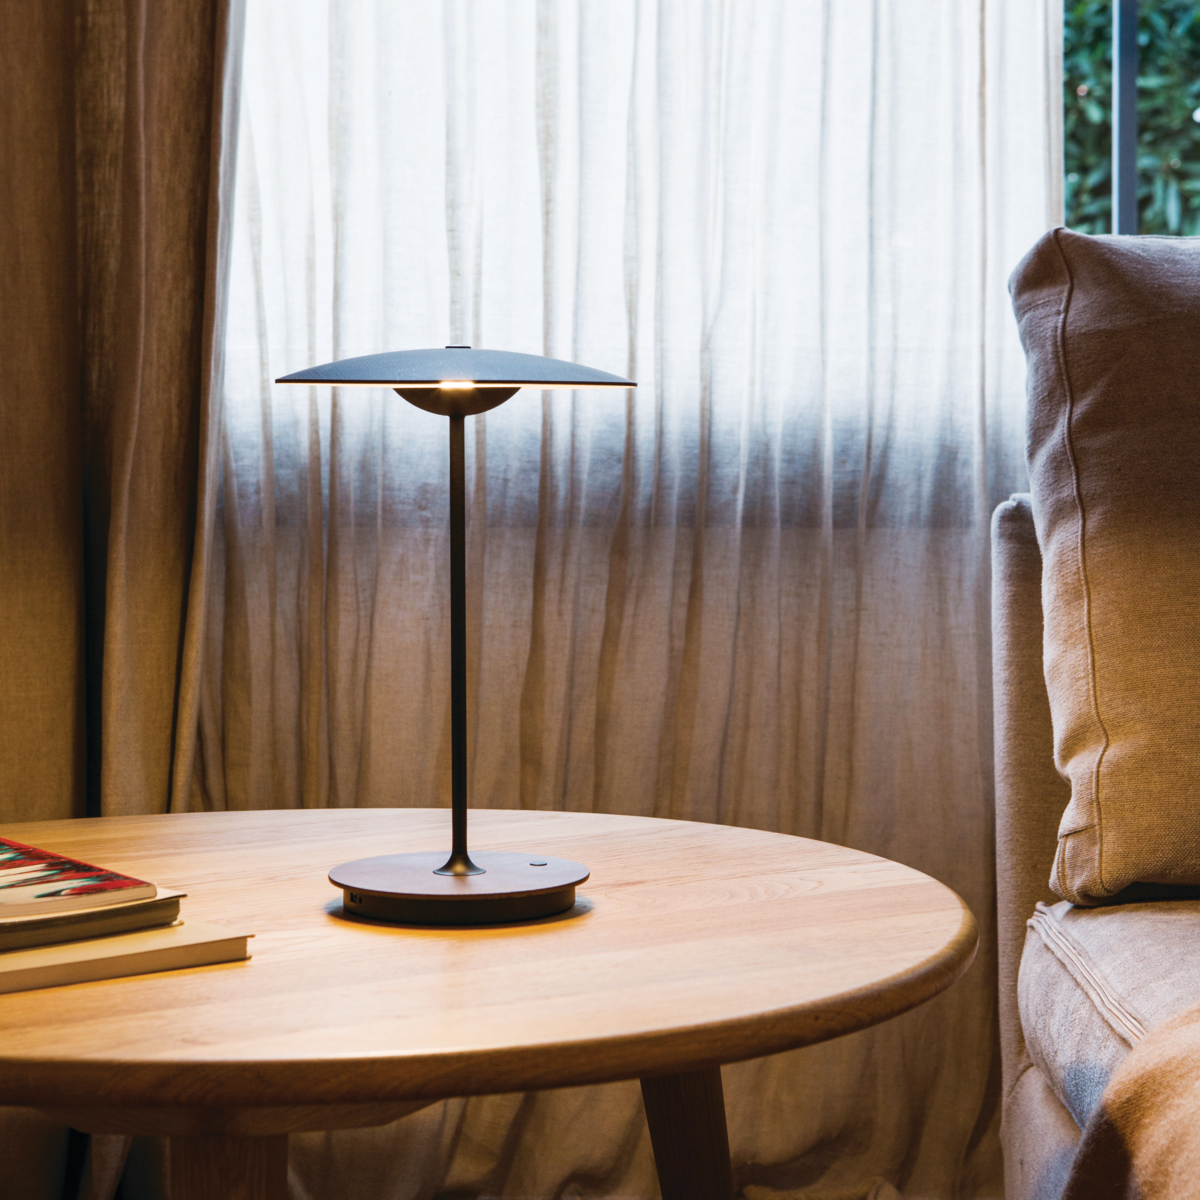 Small black table lamp on wood circular end table in front of a curtained window